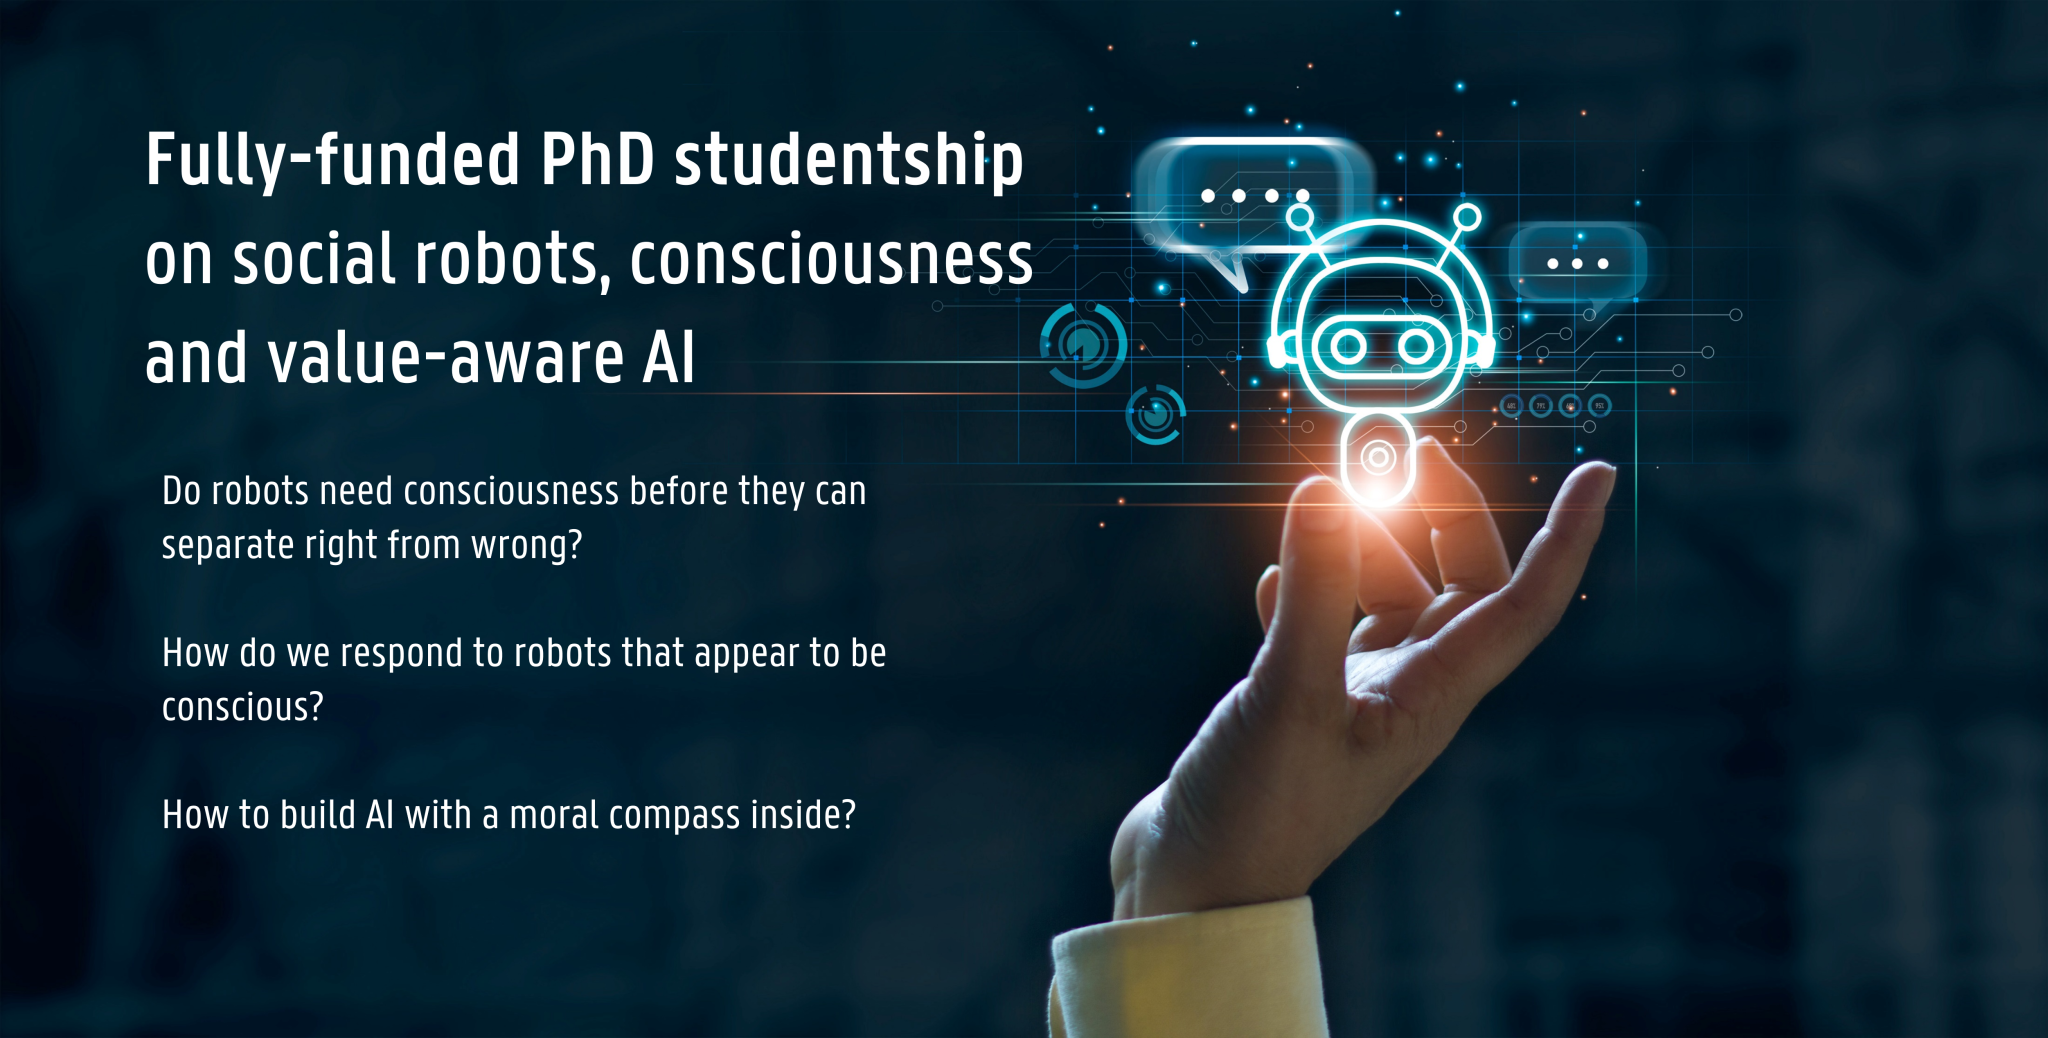 Fully-funded PhD studentship on social robots, consciousness and value-aware AI